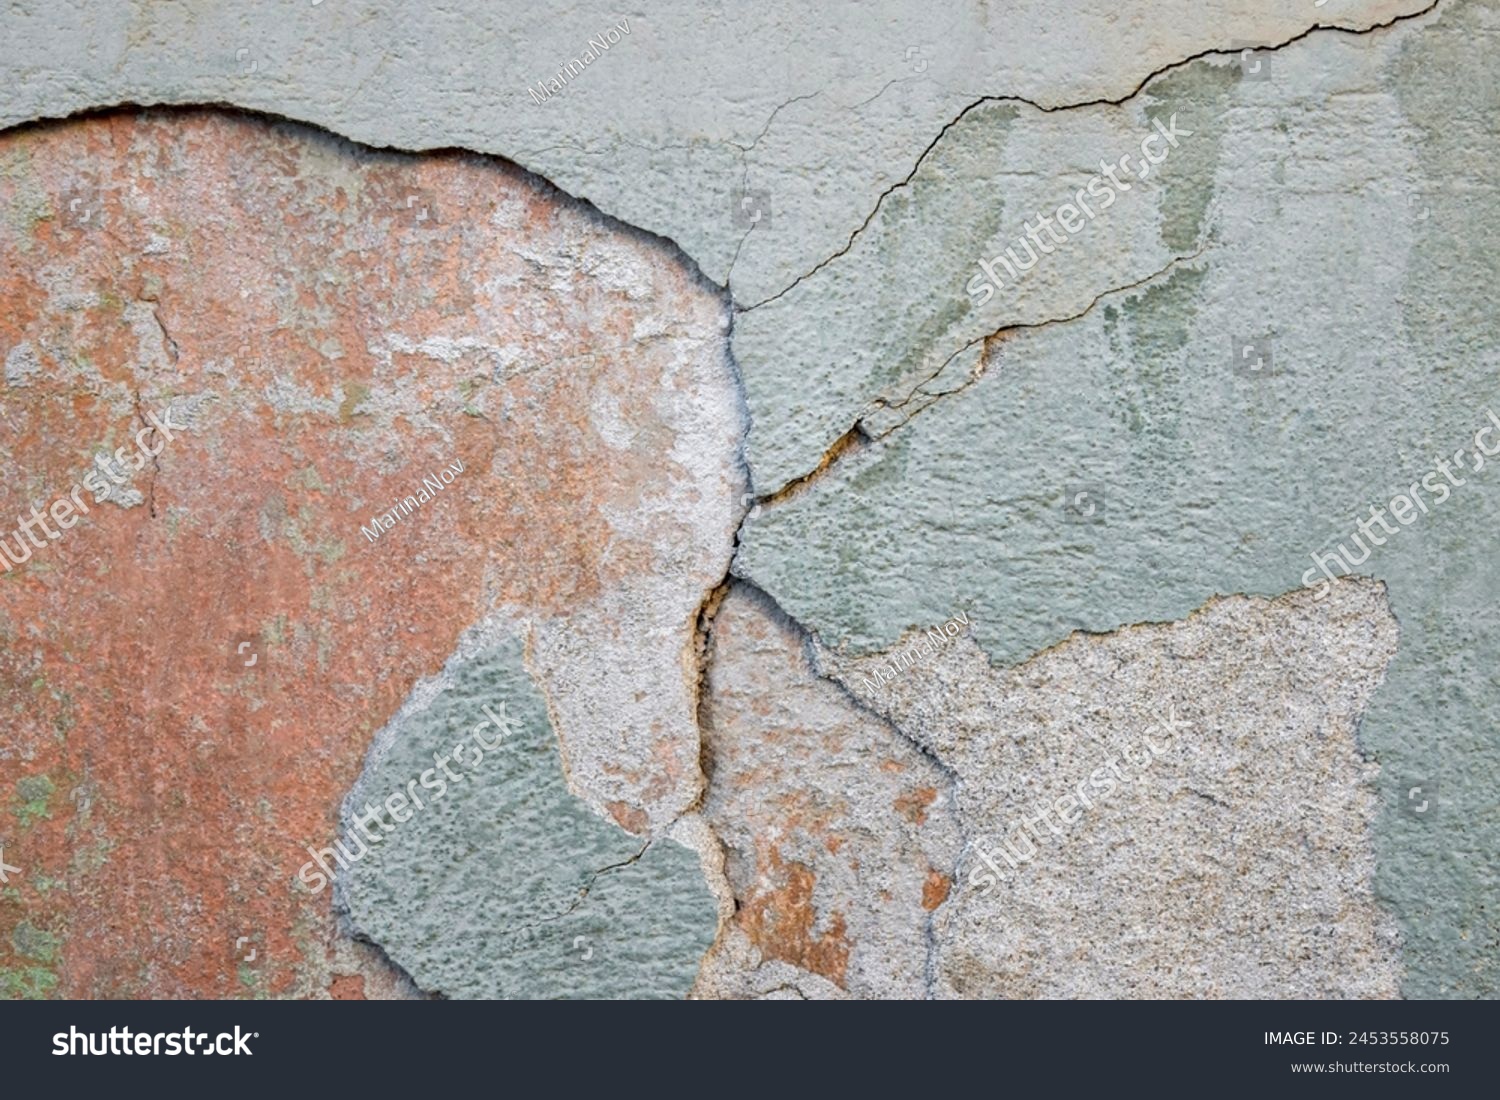 Colorful green-orange-yellow wall surface of an old building with crumbling plaster, cracks and stains as a textured background. Copy space. Selective focus. #2453558075